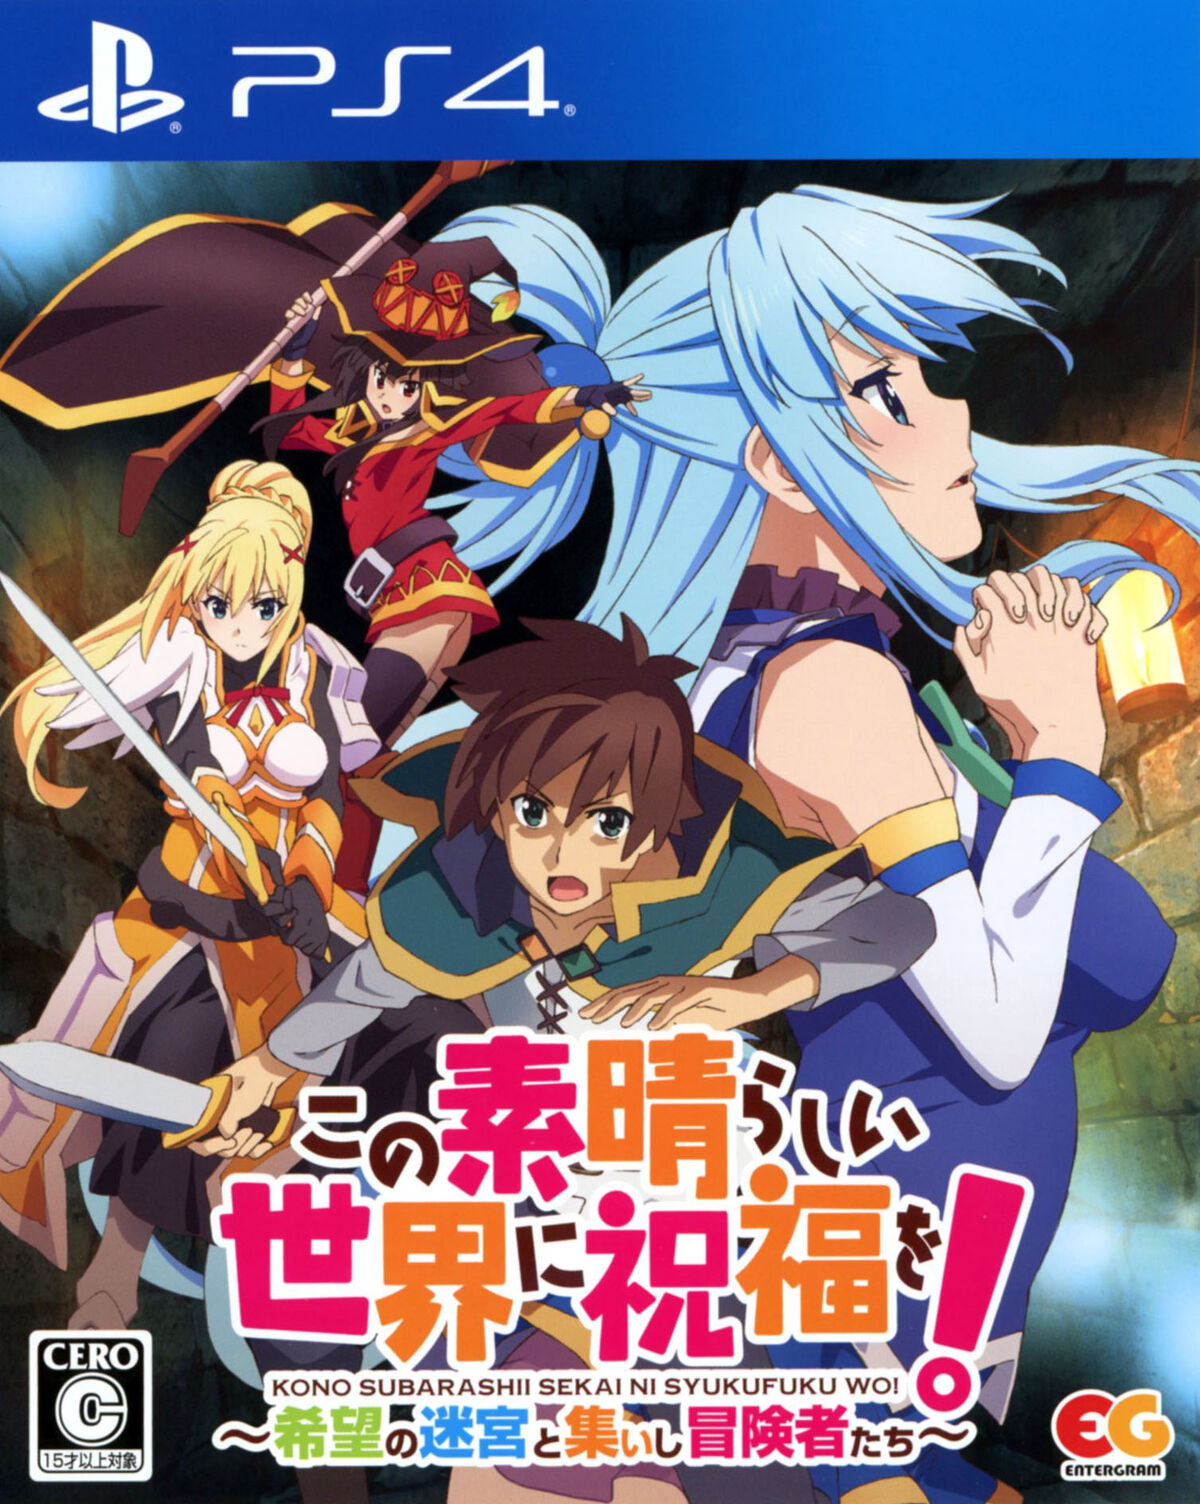 Fantasy Anime Konosuba is Getting a New Dungeon Crawler RPG for PS4 and Vita